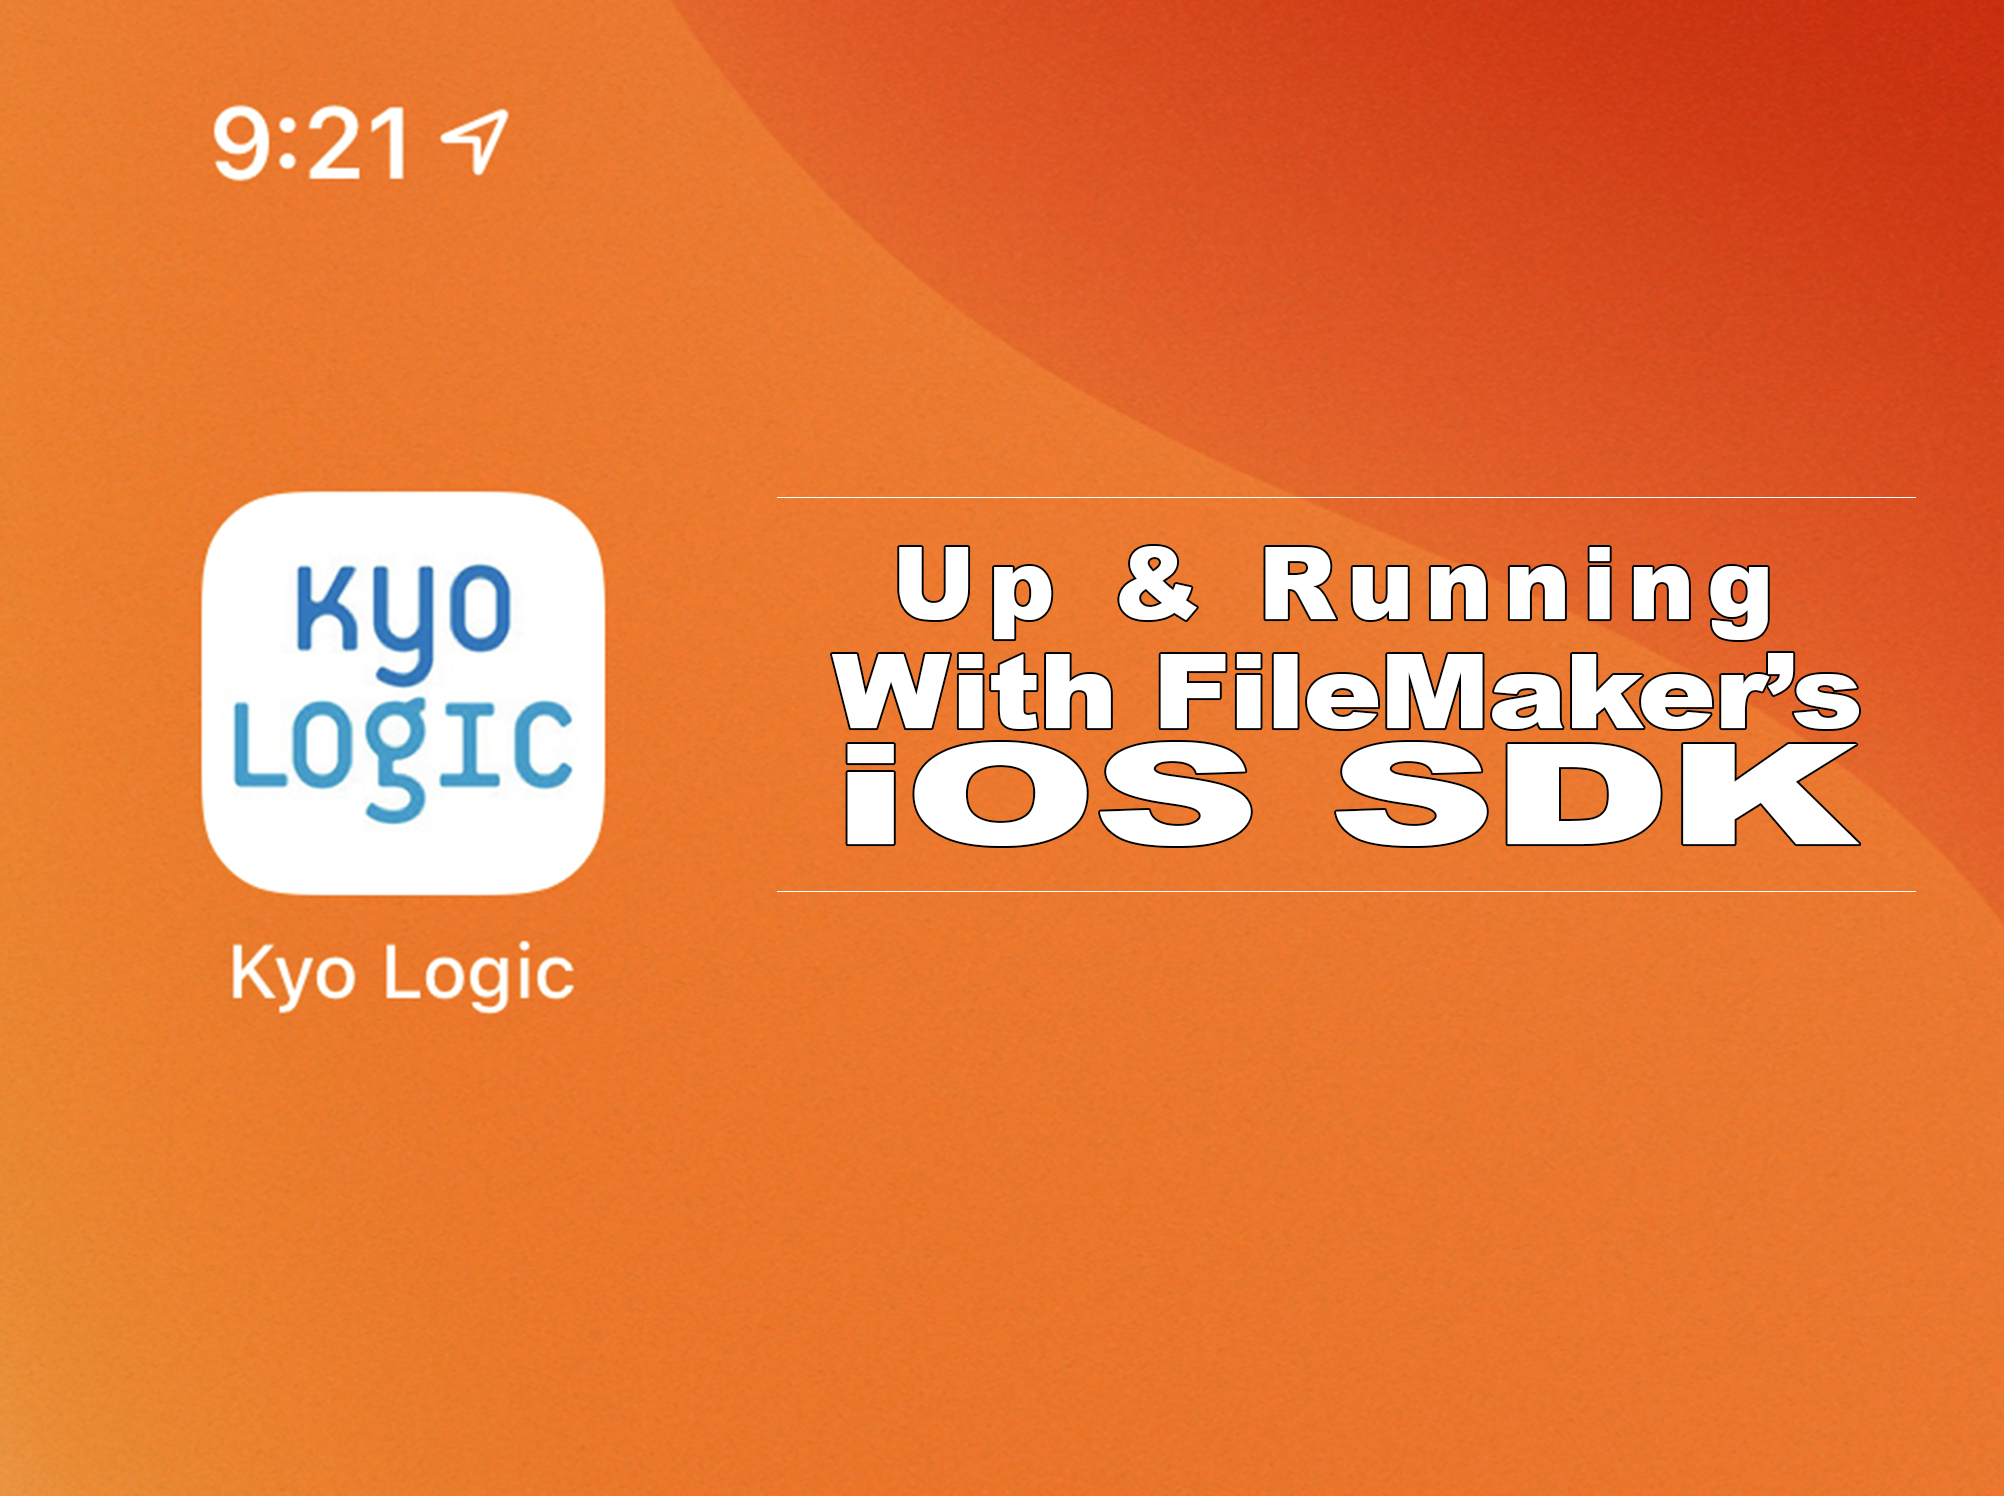 Up and Running with FileMaker’s IOS SDK